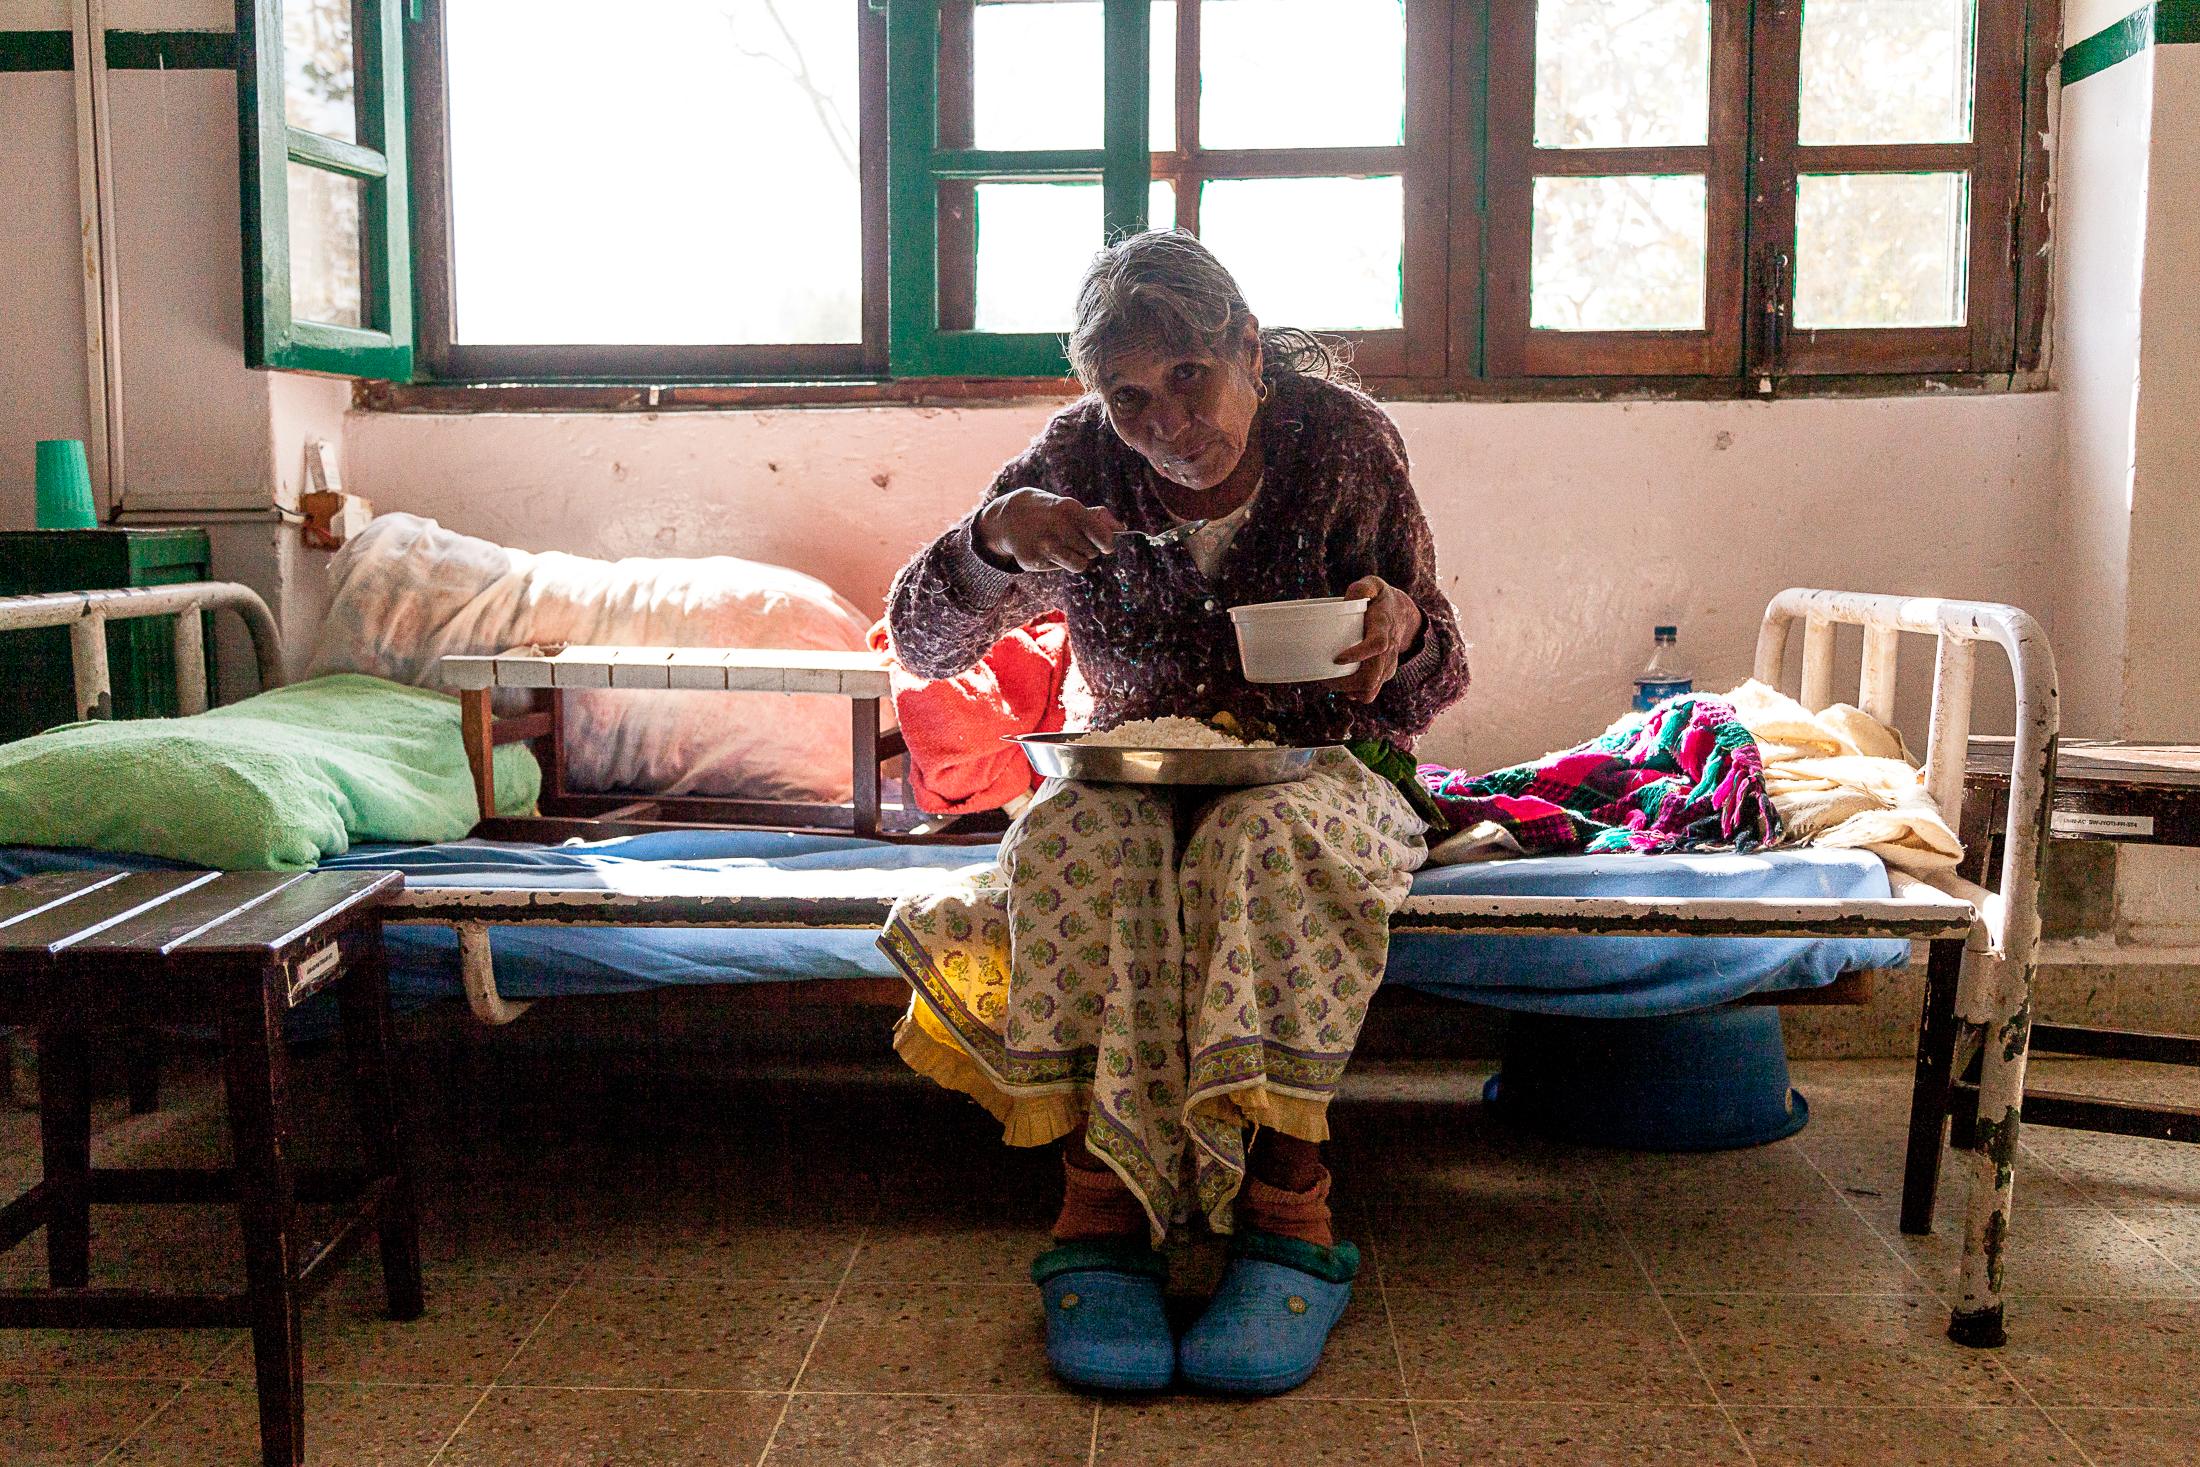 The Forgotten - LELE, NEPAL - JANUARY 24: A woman diagnosed with leprosy...